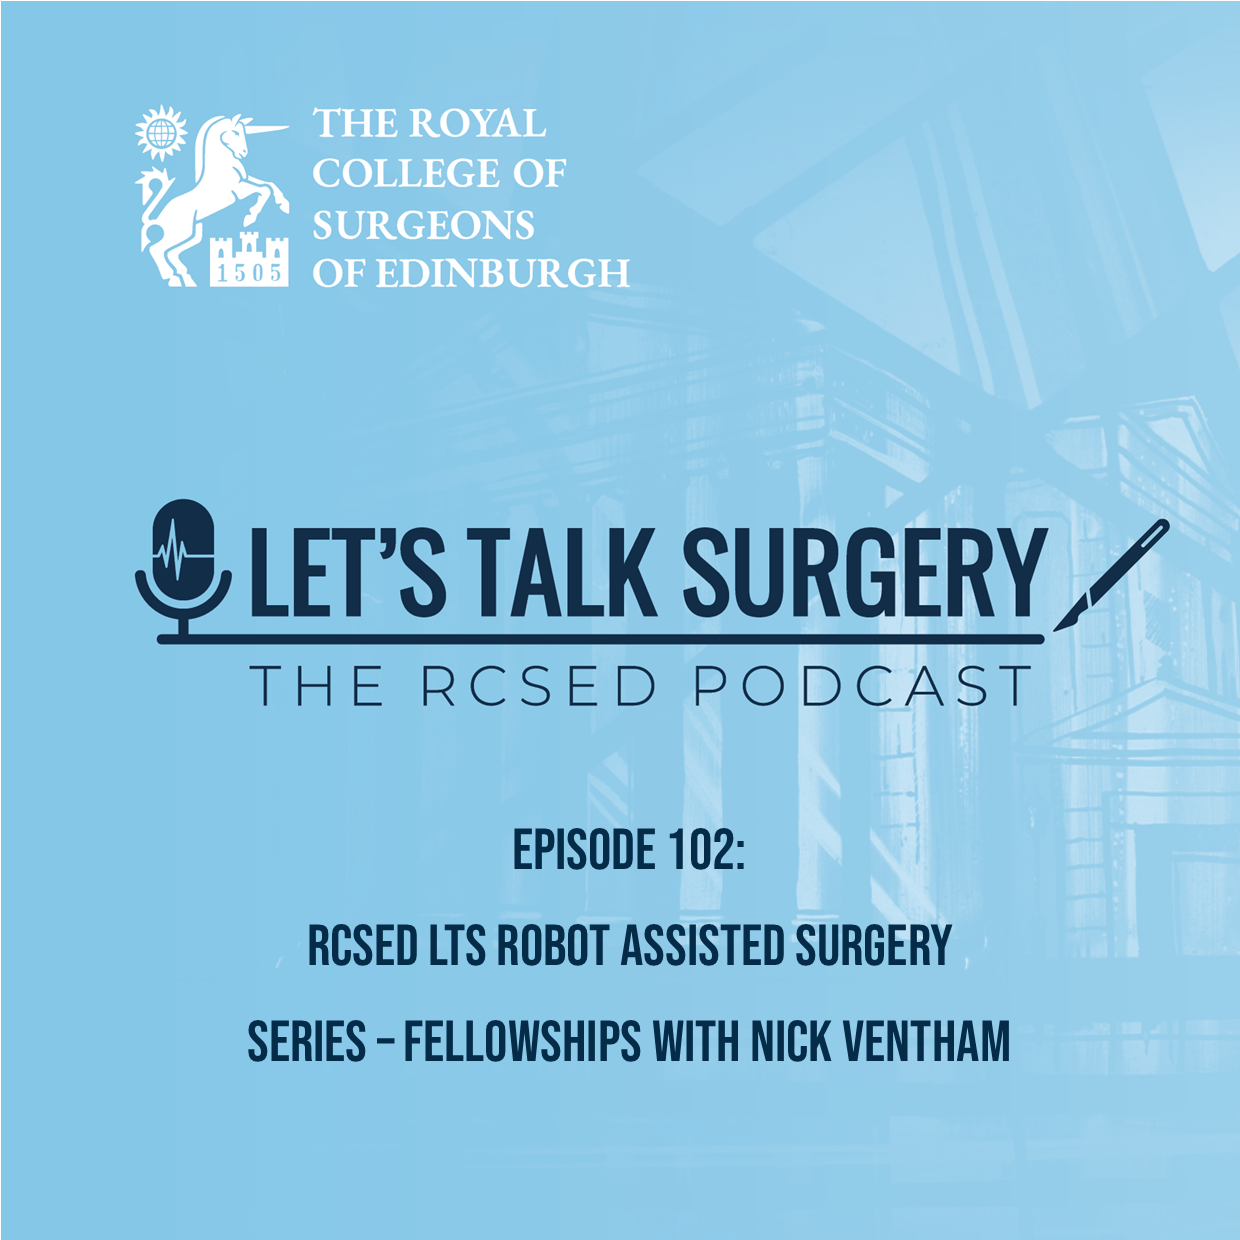 RCSED LTS Robot Assisted Surgery Series – Fellowships with Nick Ventham